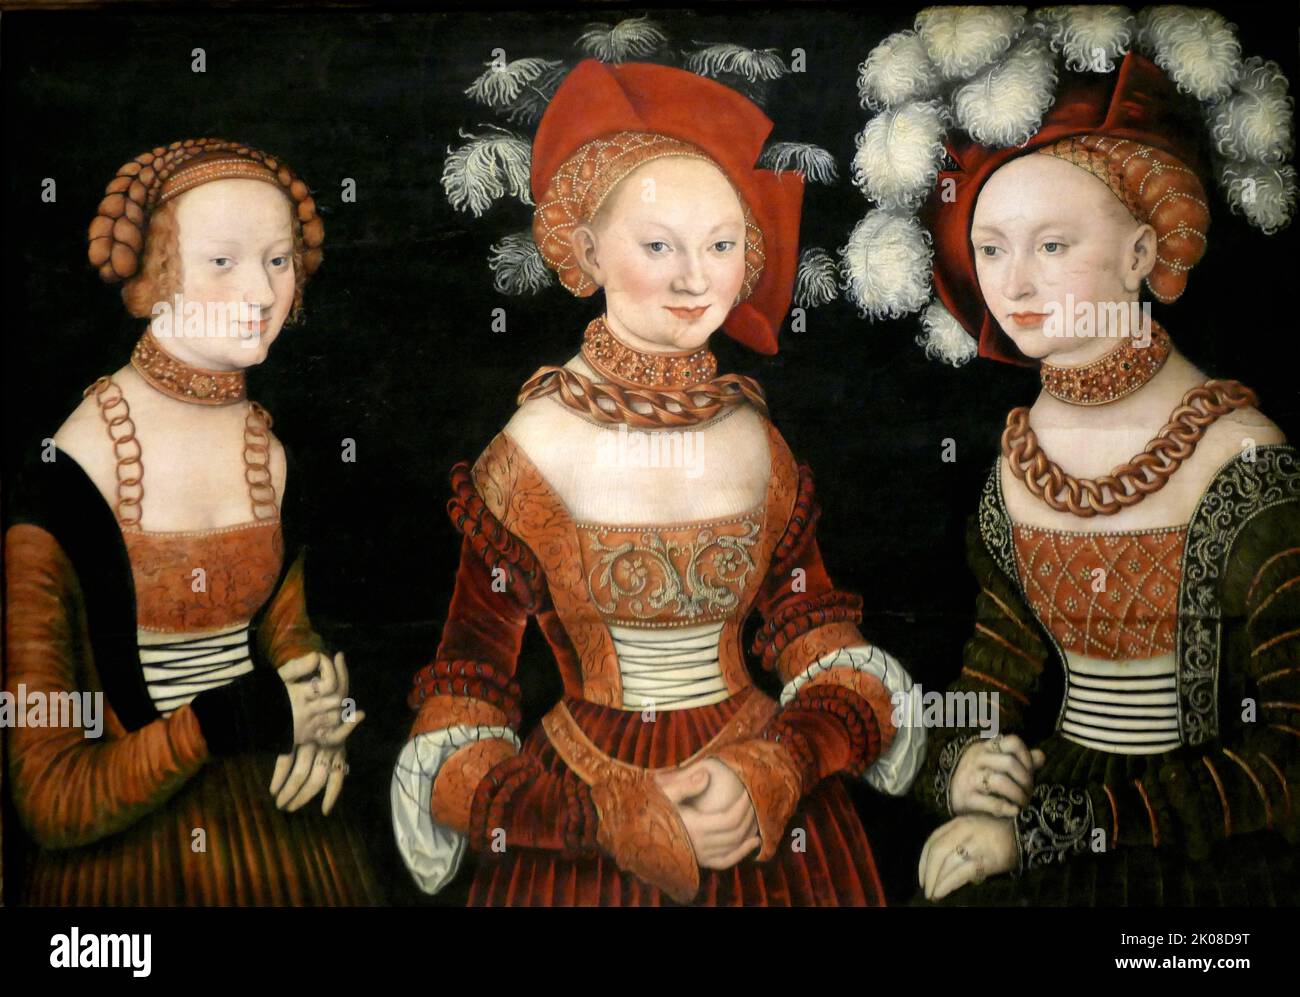 Sibylla, Emilia, and Sidonia von Sachsen, Princess of Saxony, c1535, by Lucas Cranach the Younger (October 4, 1515 - January 25, 1586) was a German Renaissance painter and portraitist Stock Photo